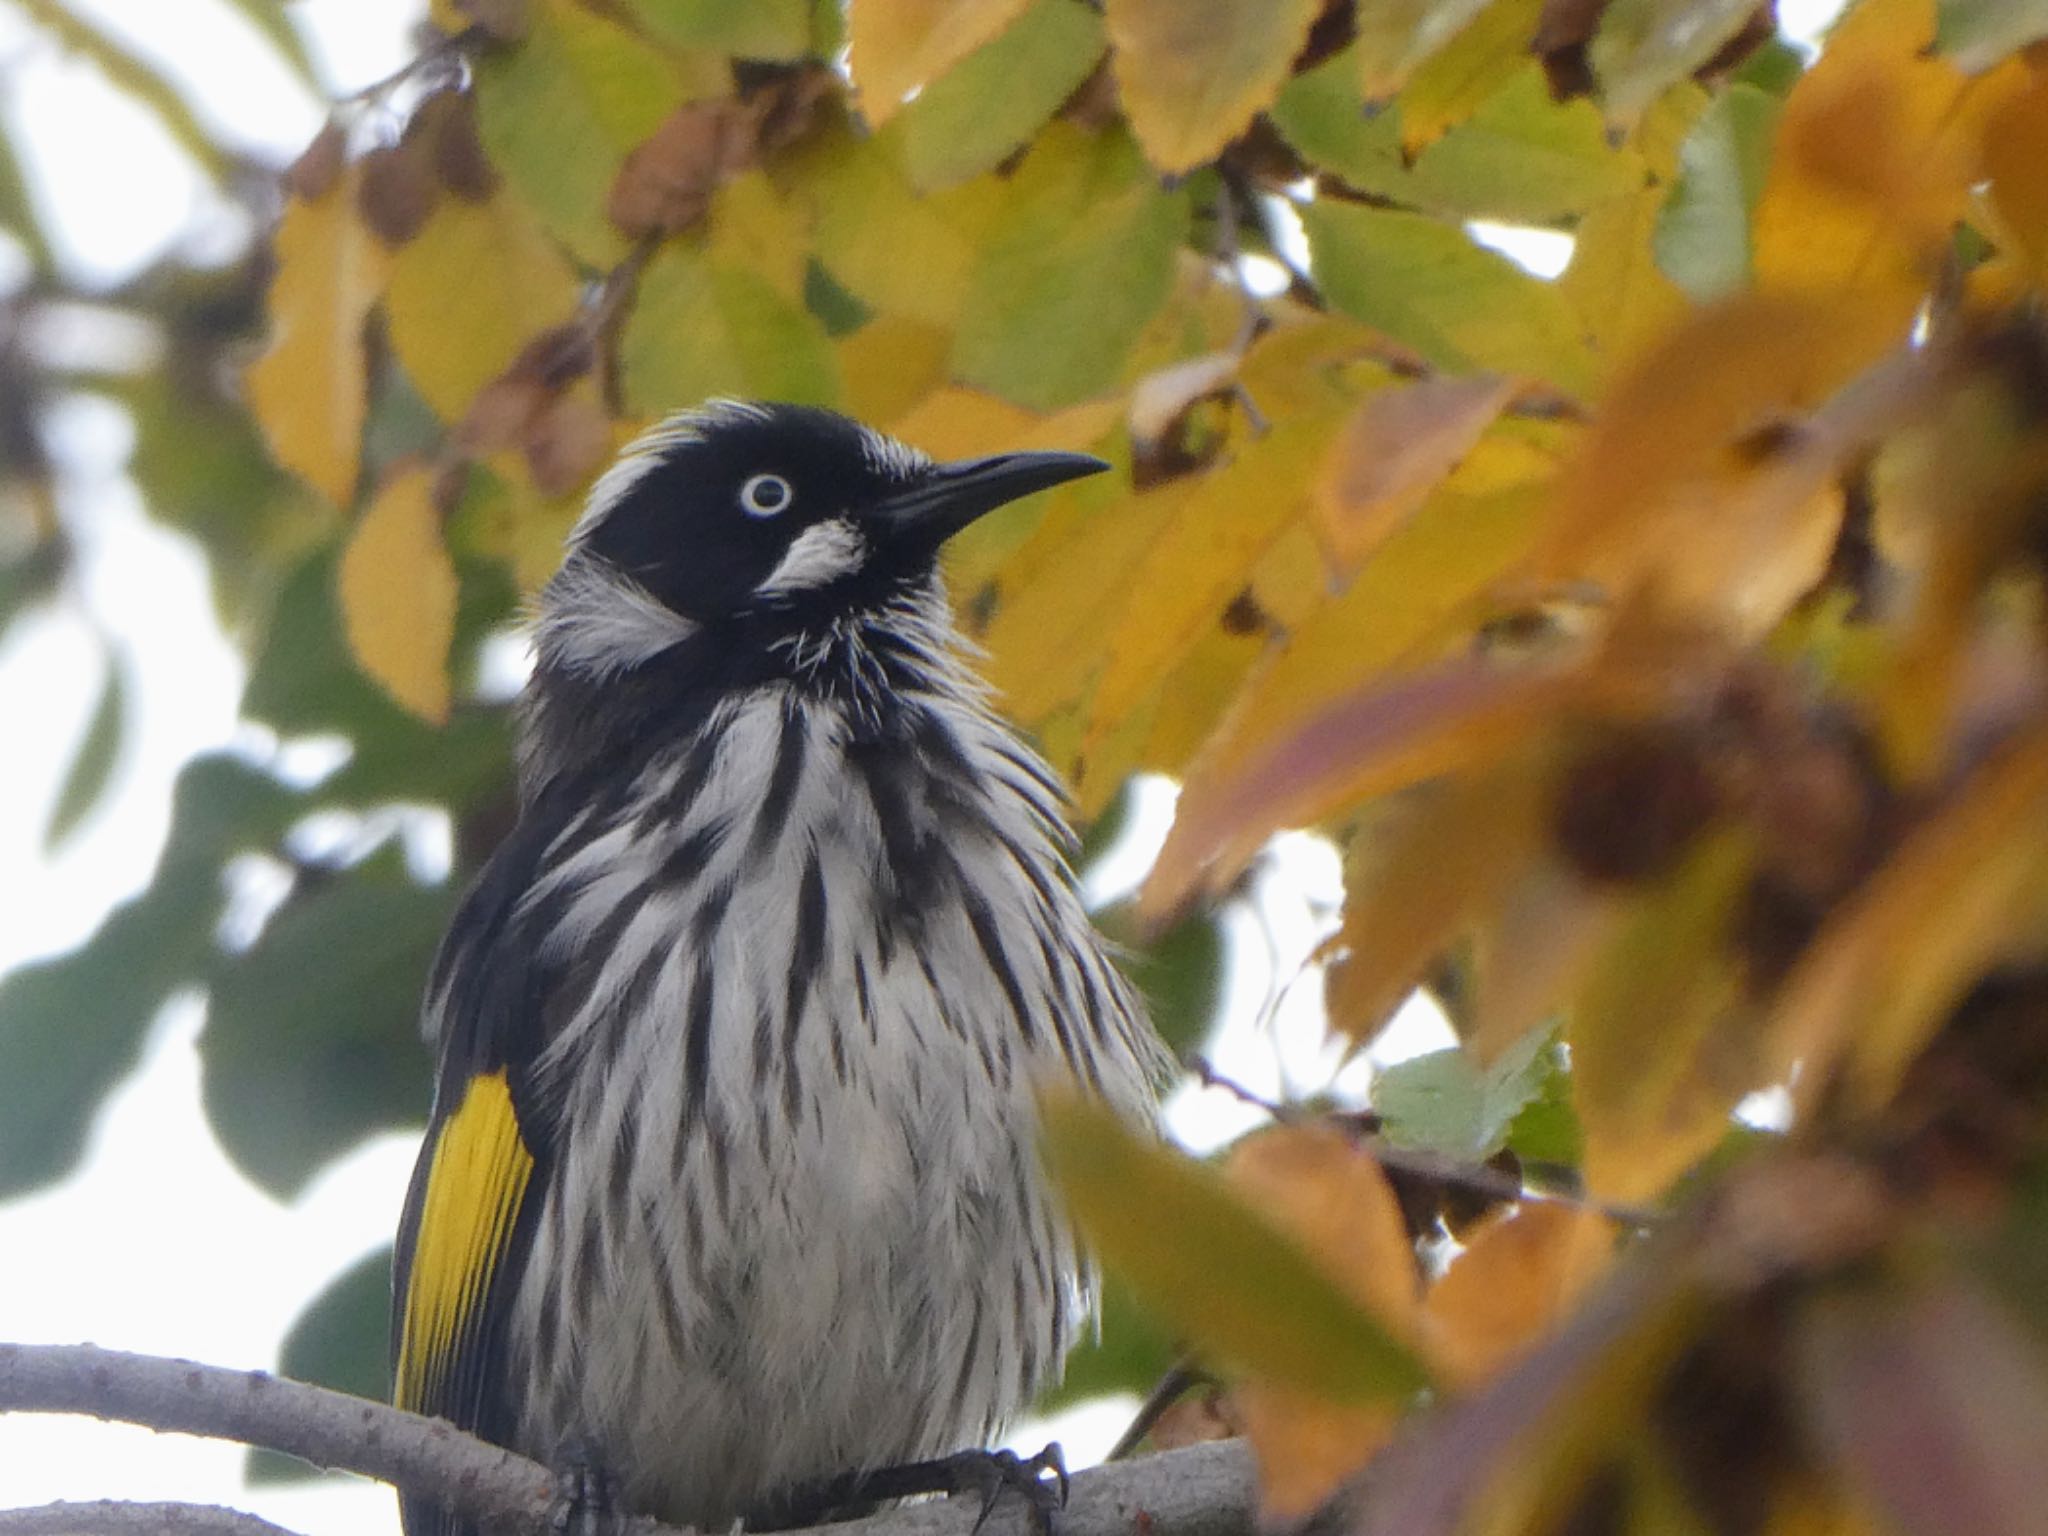 Photo of New Holland Honeyeater at Seppeltsfield, SA, Australia by Maki